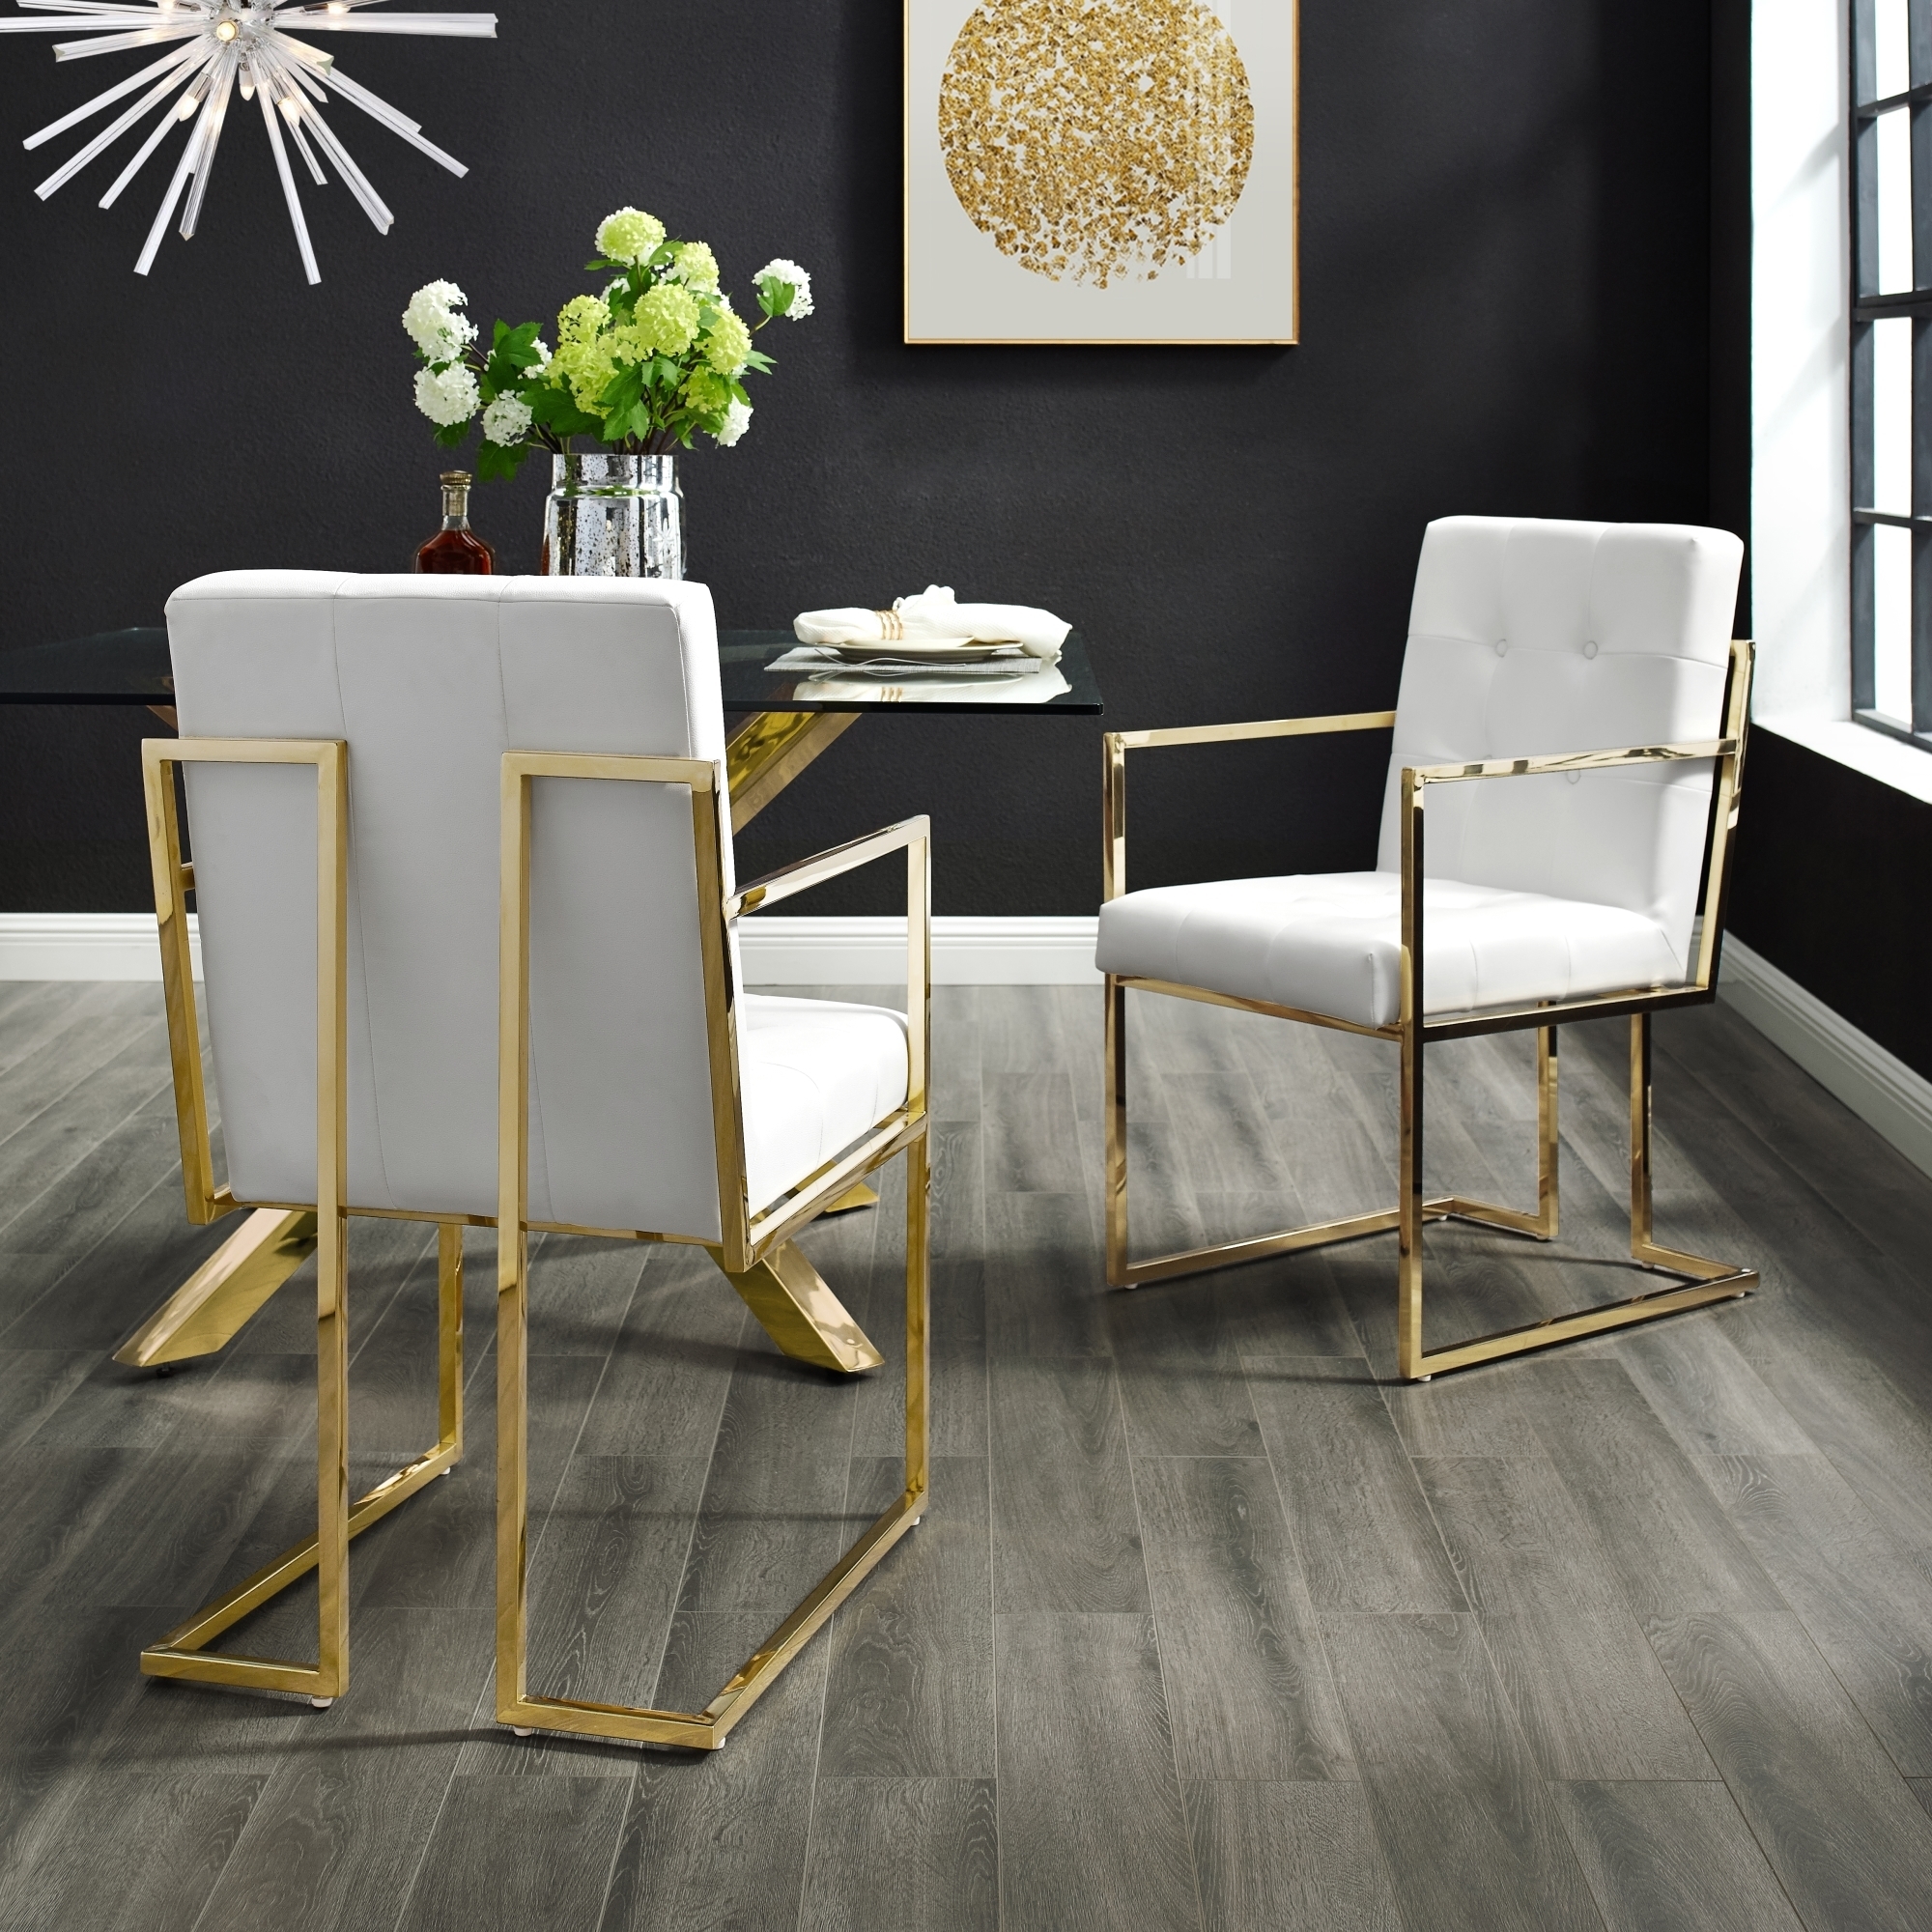 Cecille PU Leather Or Velvet Dining Chair-Set Of 2-Chrome-Gold Frame-Square Arm-Button Tufted-Modern & Functional By Inspired Home - White L